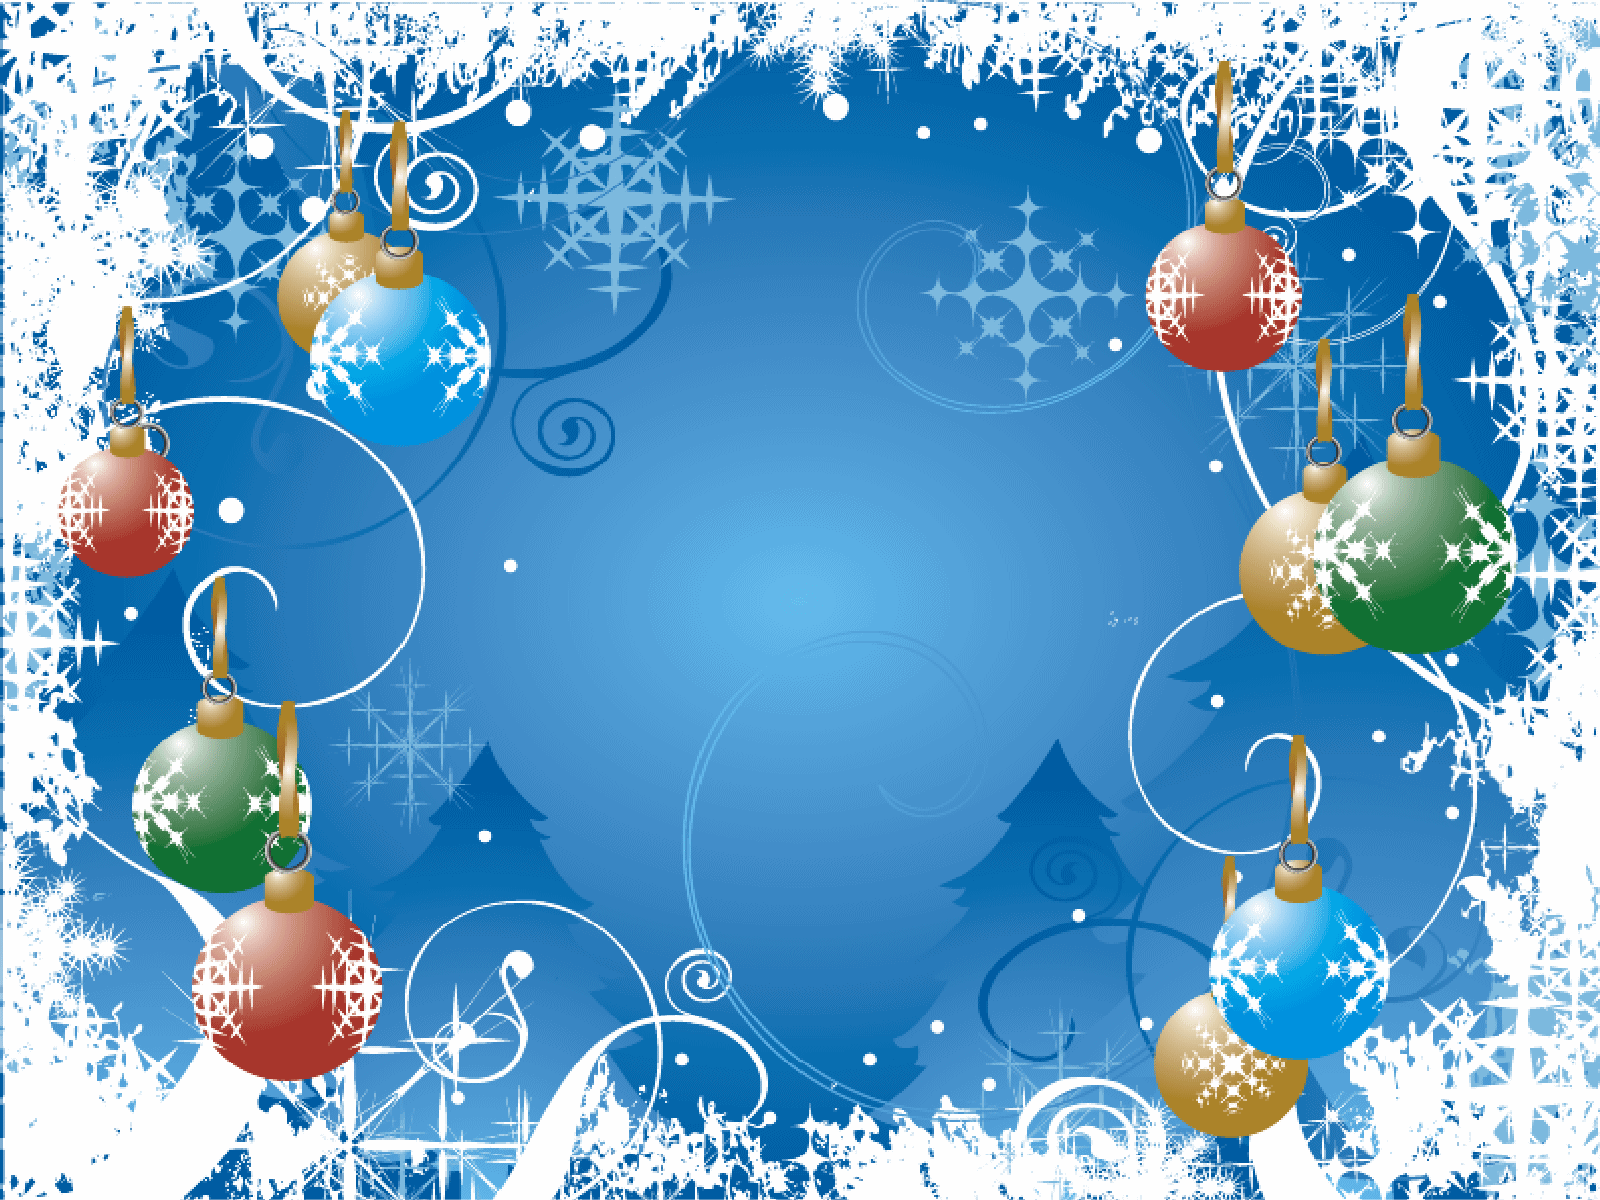 Free Backgrounds Christmas Images - Wallpaper Cave